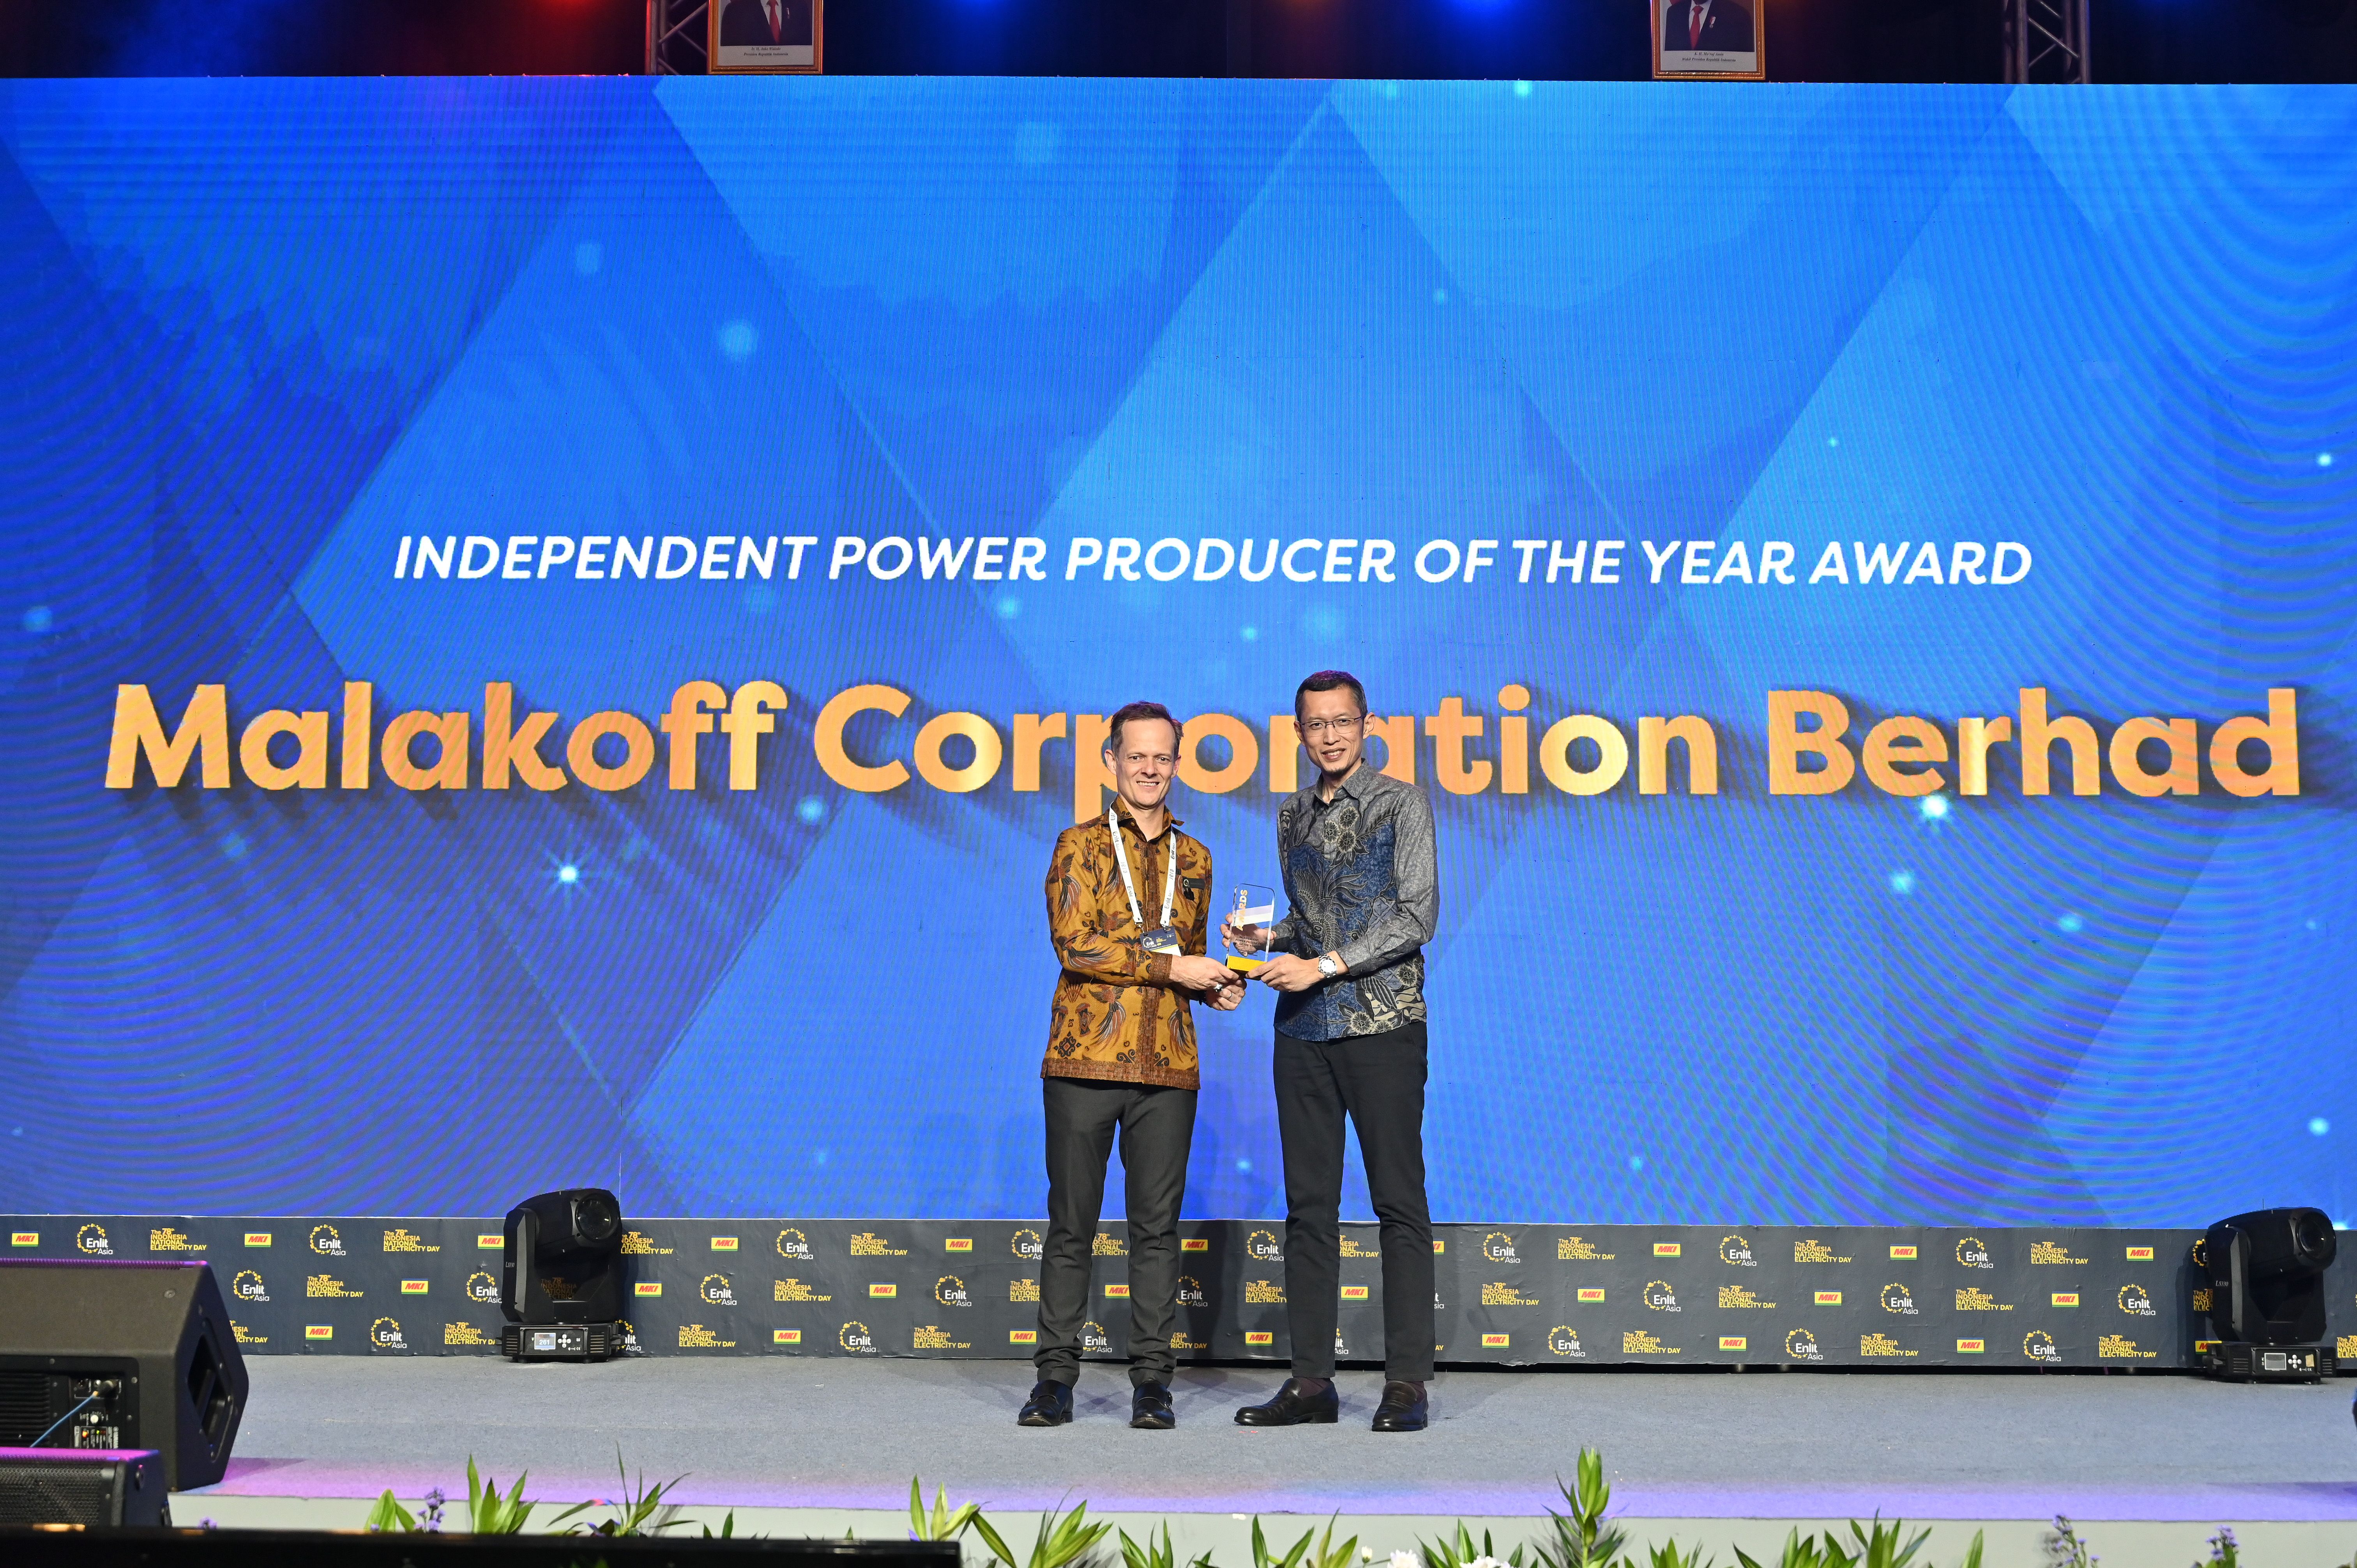 Independent Power Producer of the Year